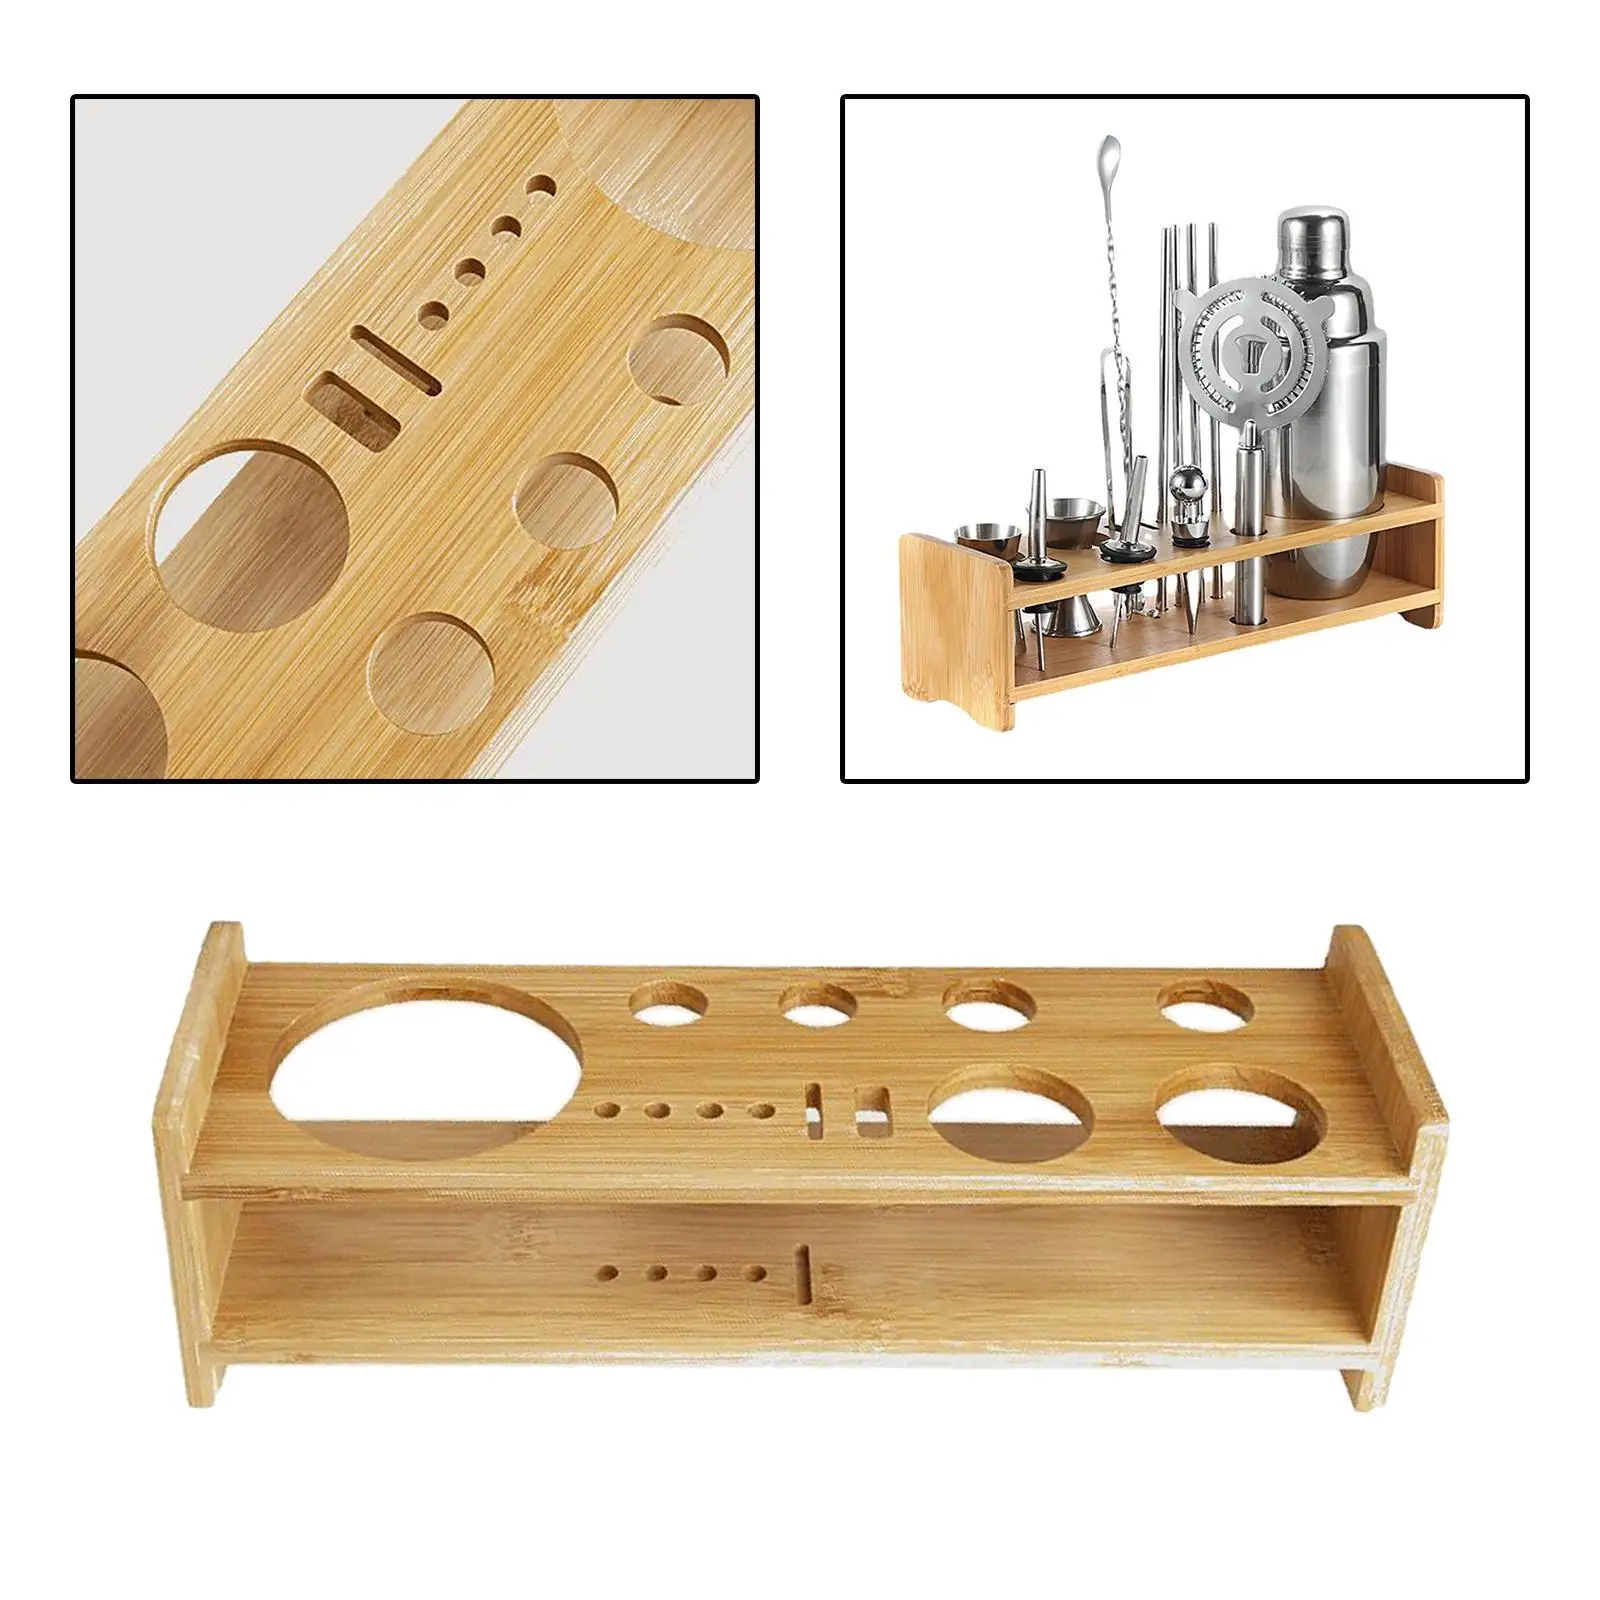 Cocktail Bartending Set Wooden Stand Professional for Home Bar Beginners